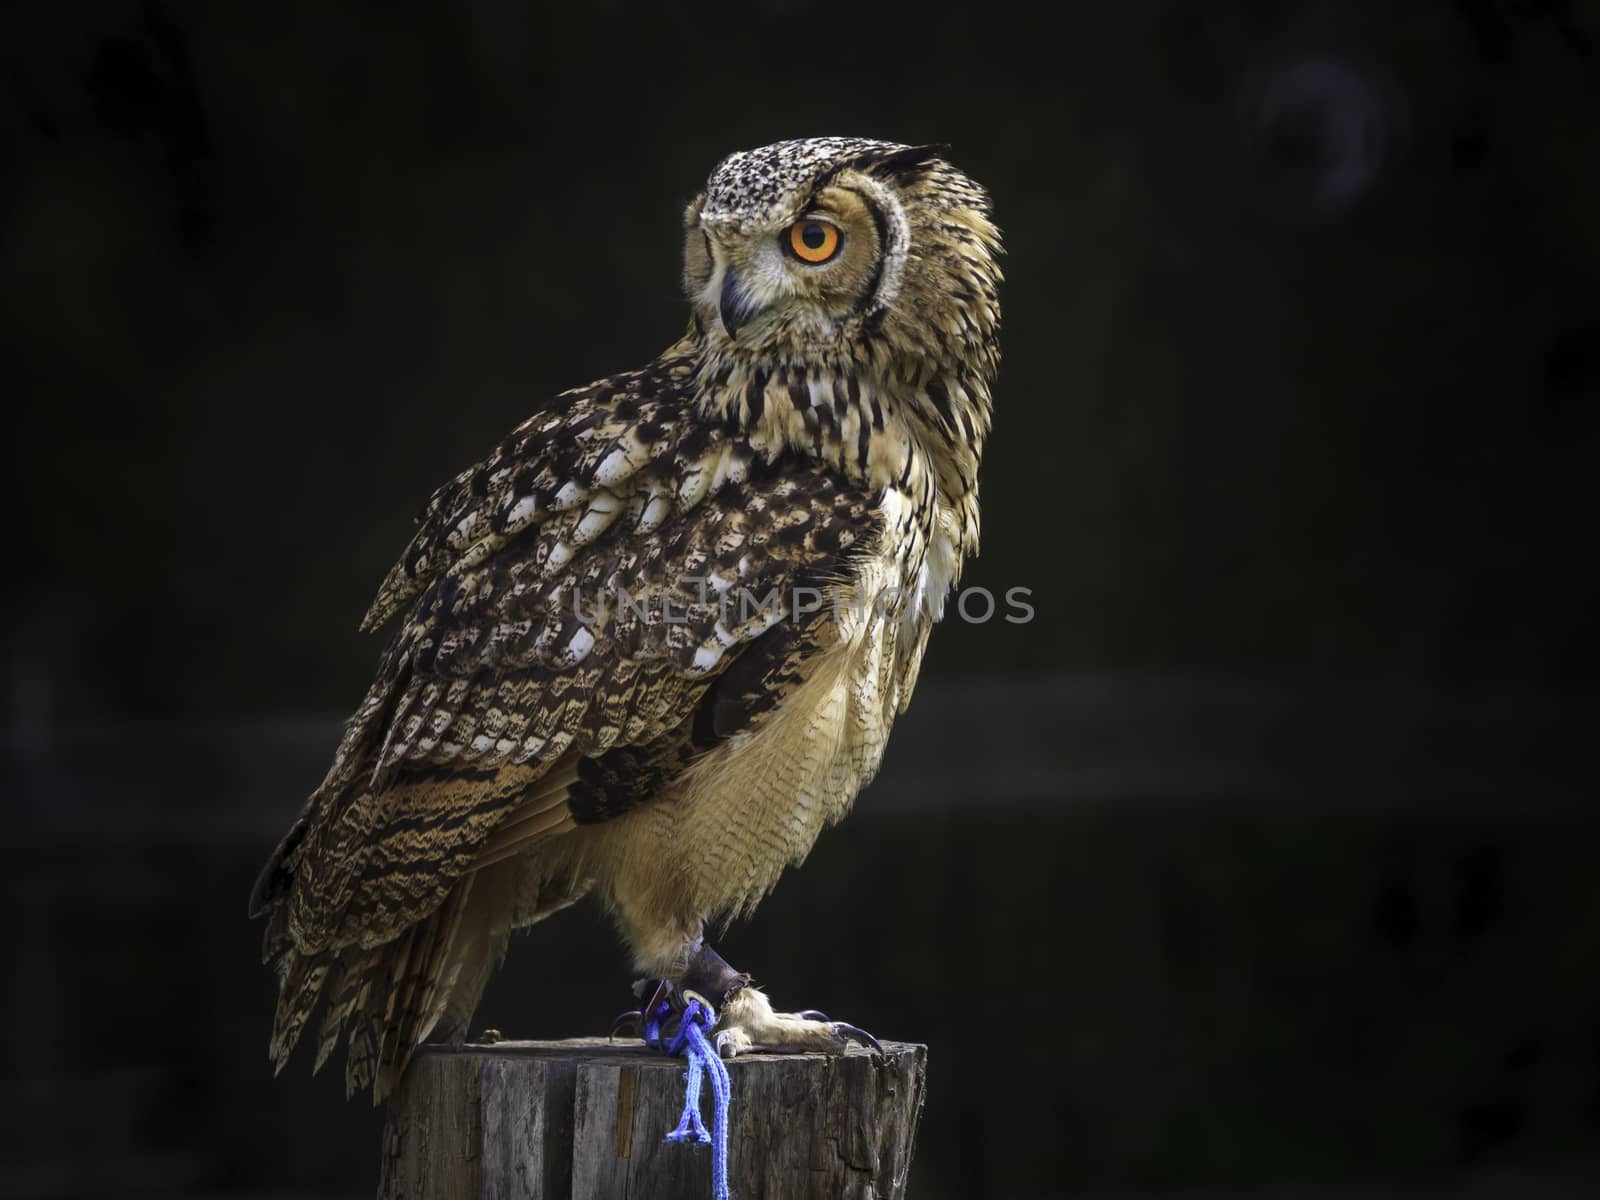 A beautiful owl placed on a trunk waiting a piece of meat from the falconer